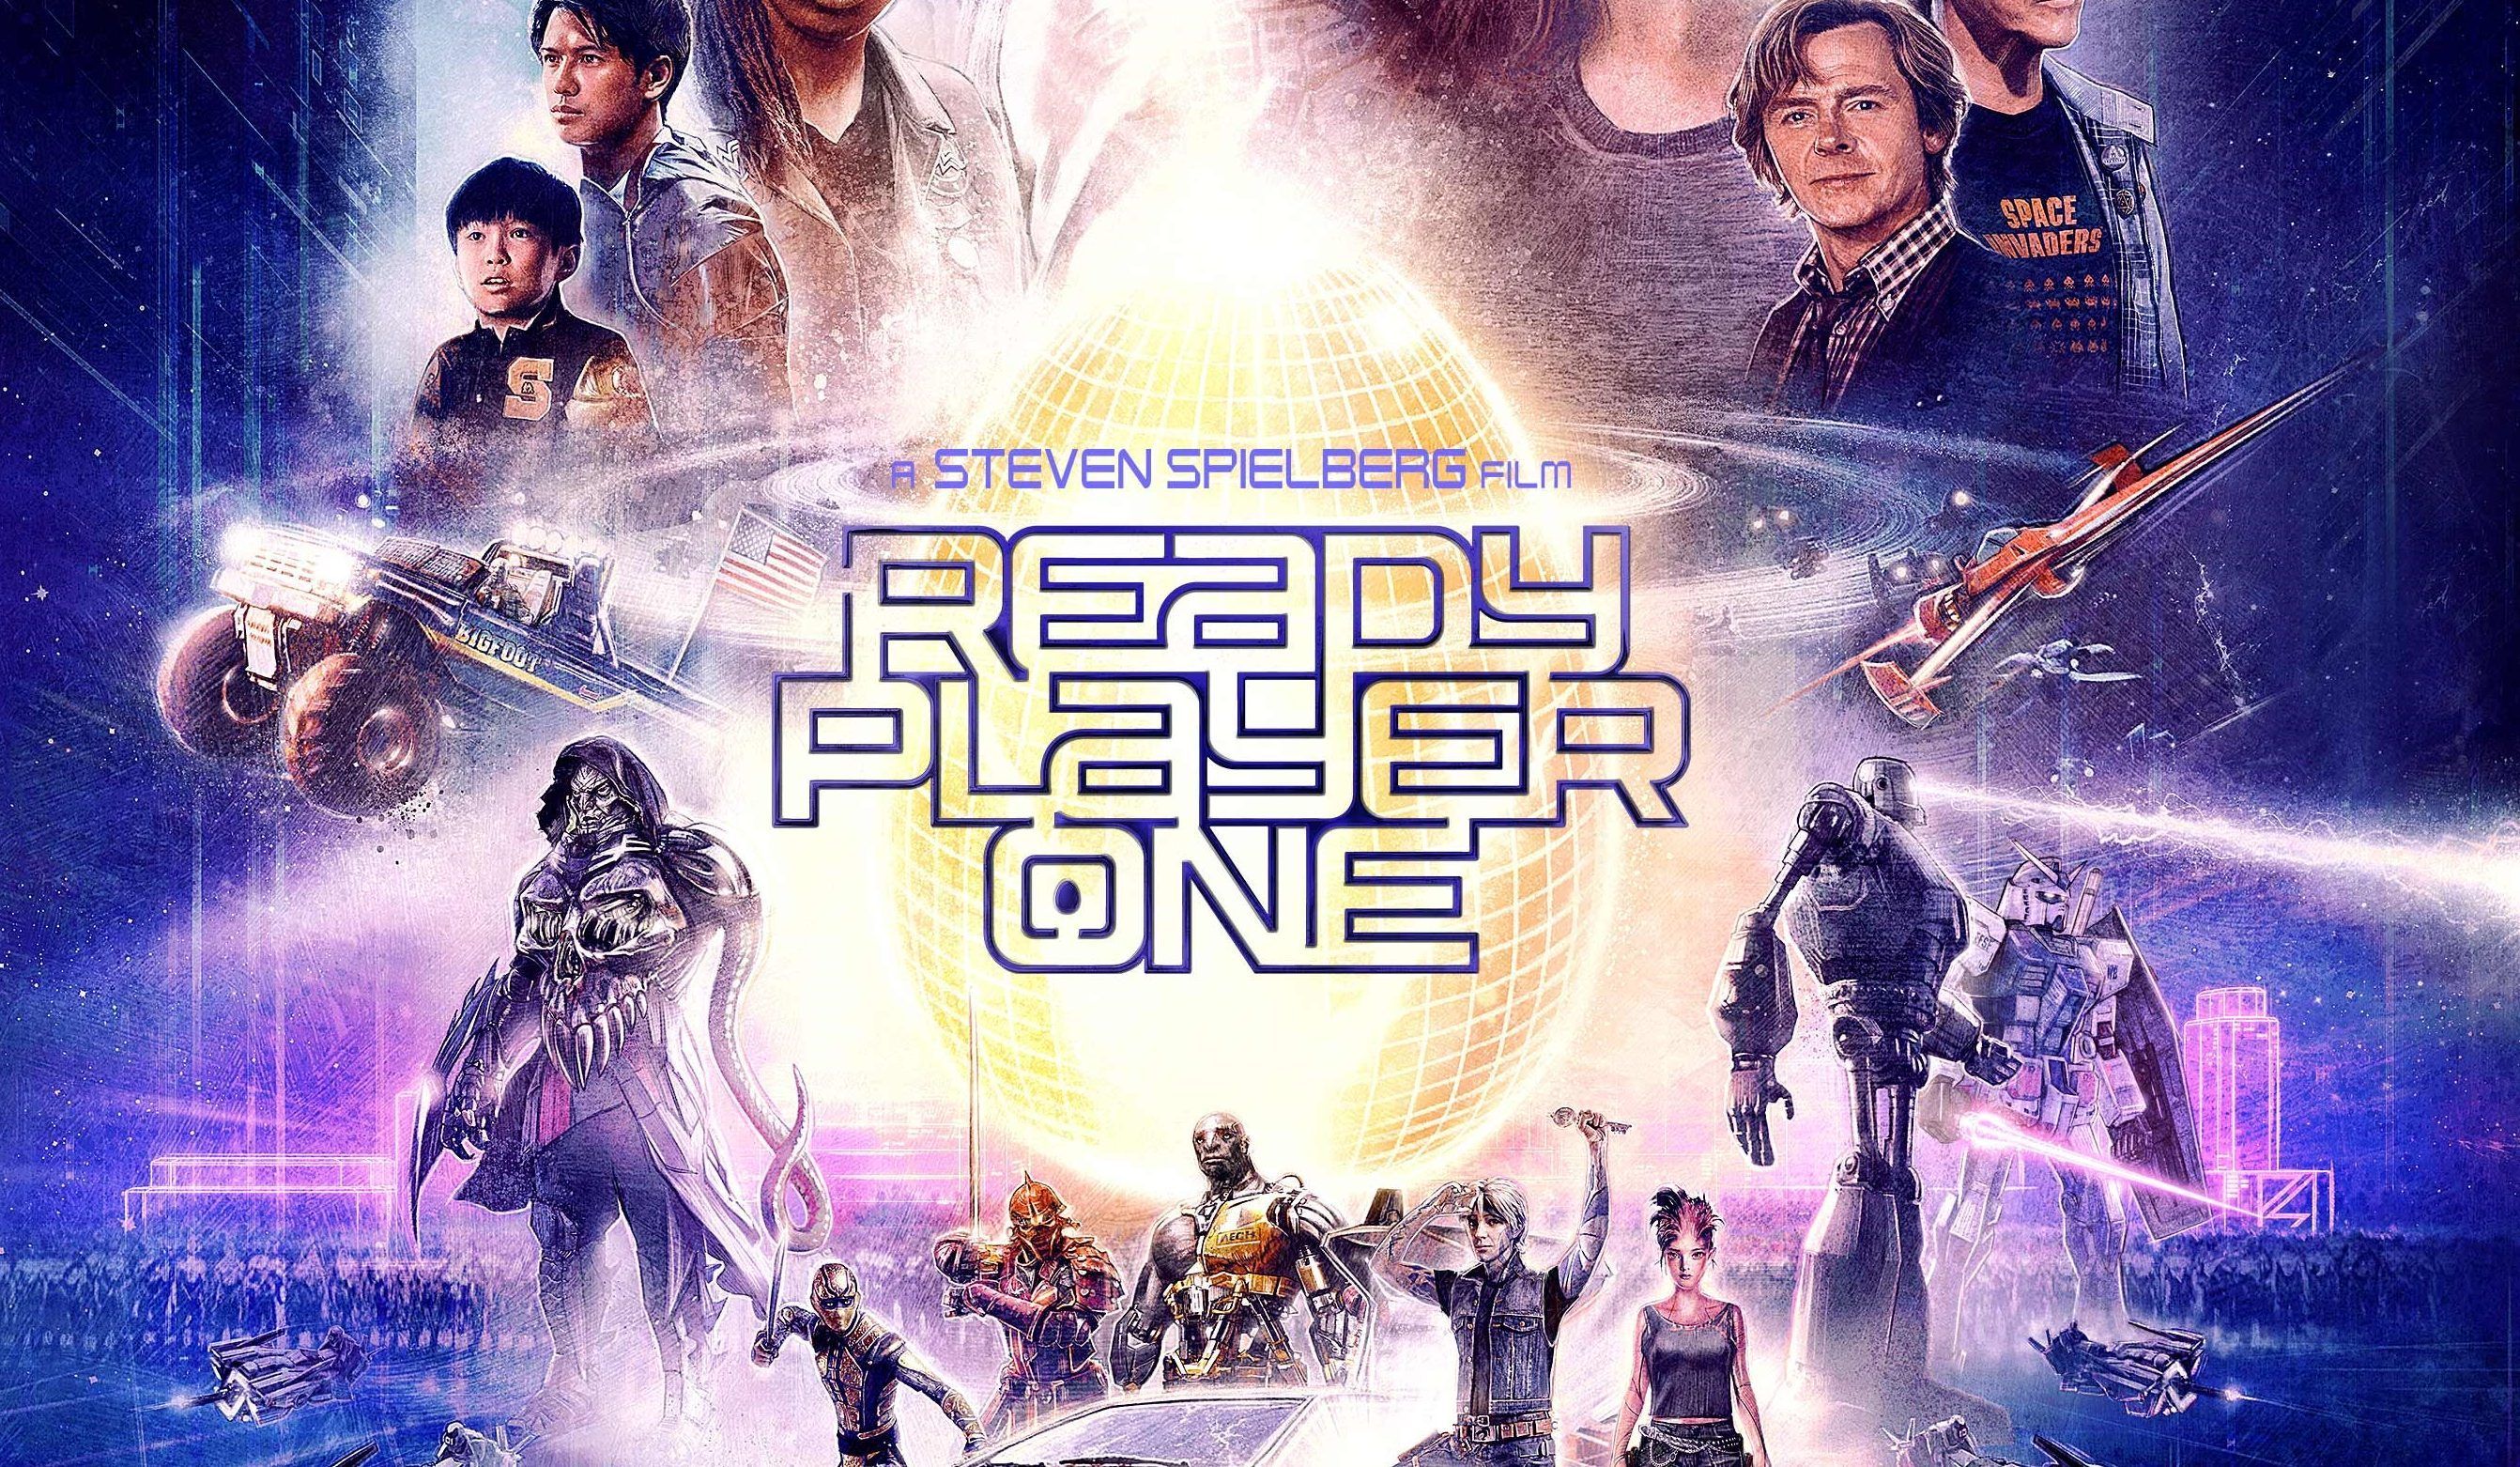 Ready Player One Archives - Home of the Alternative Movie Poster -AMP